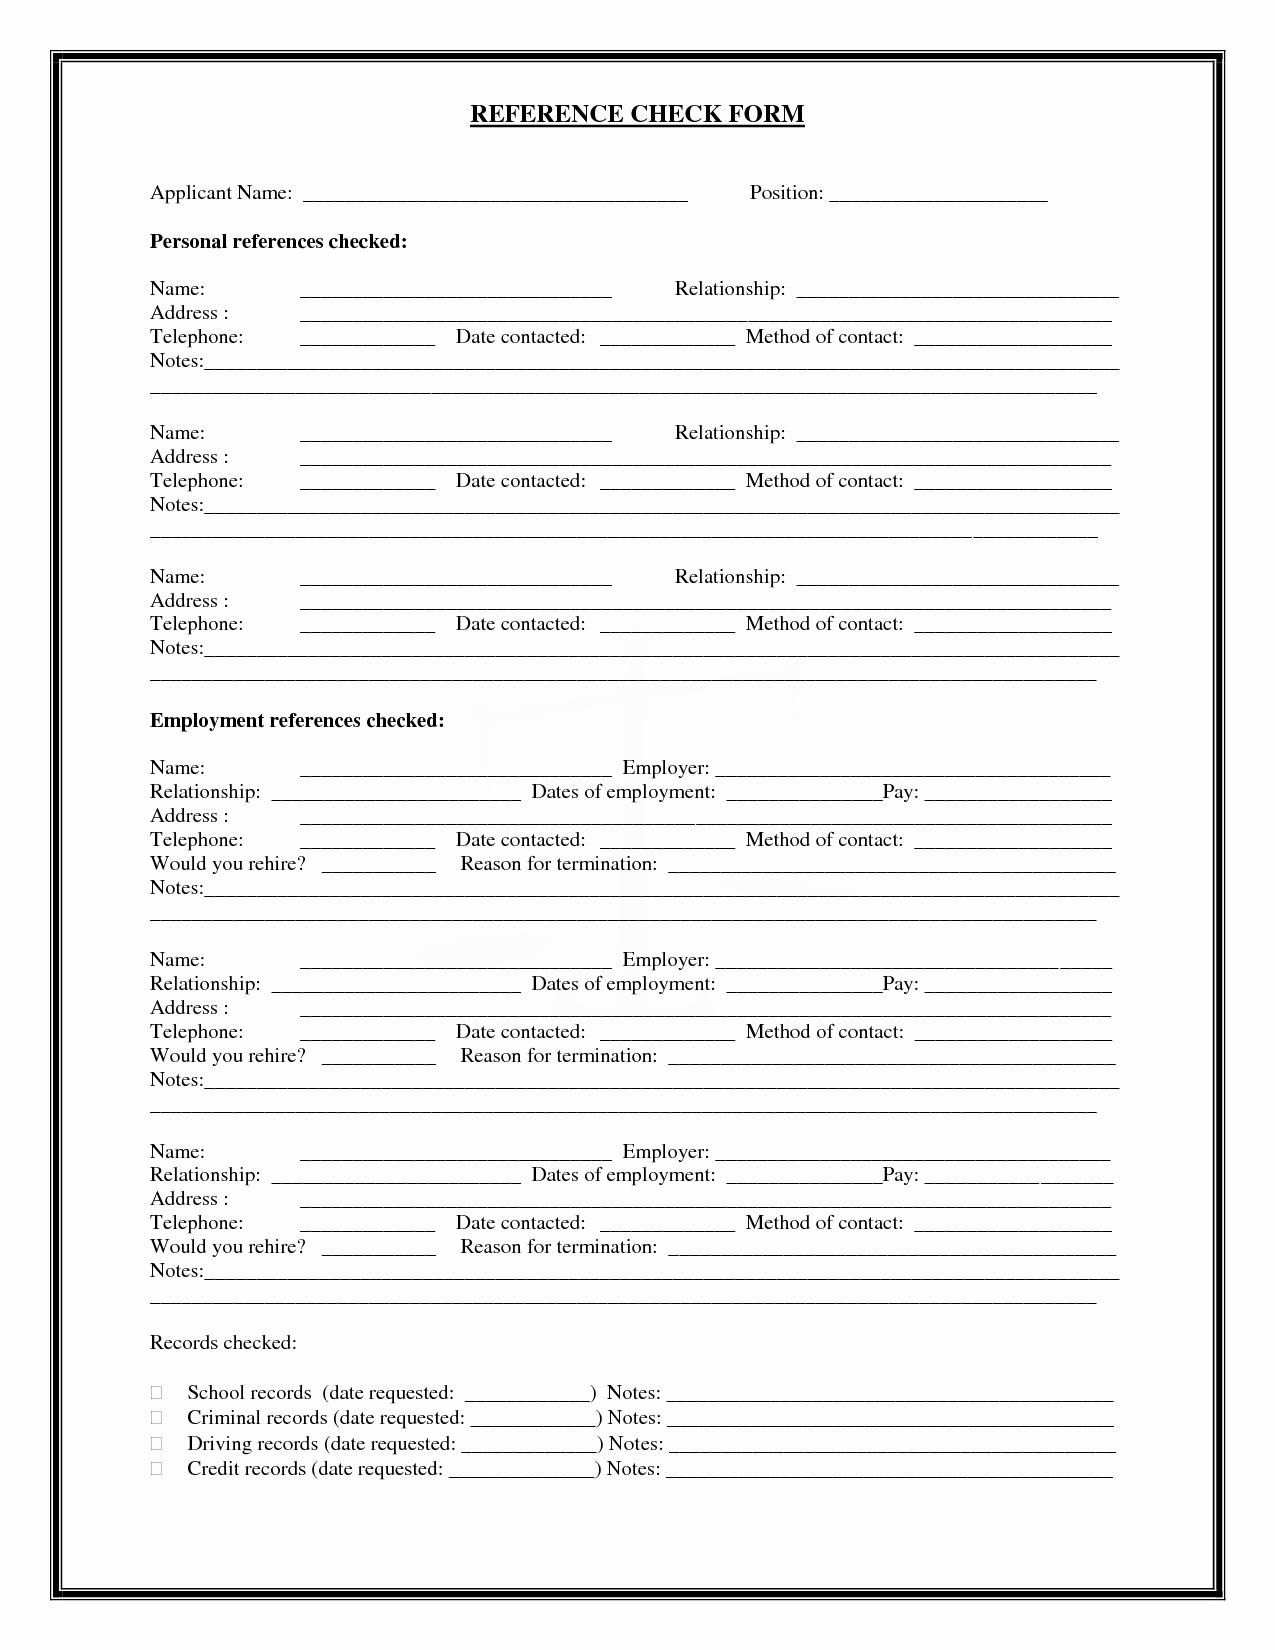 Reference Check form Template Elegant 28 Of Personal Reference form Template